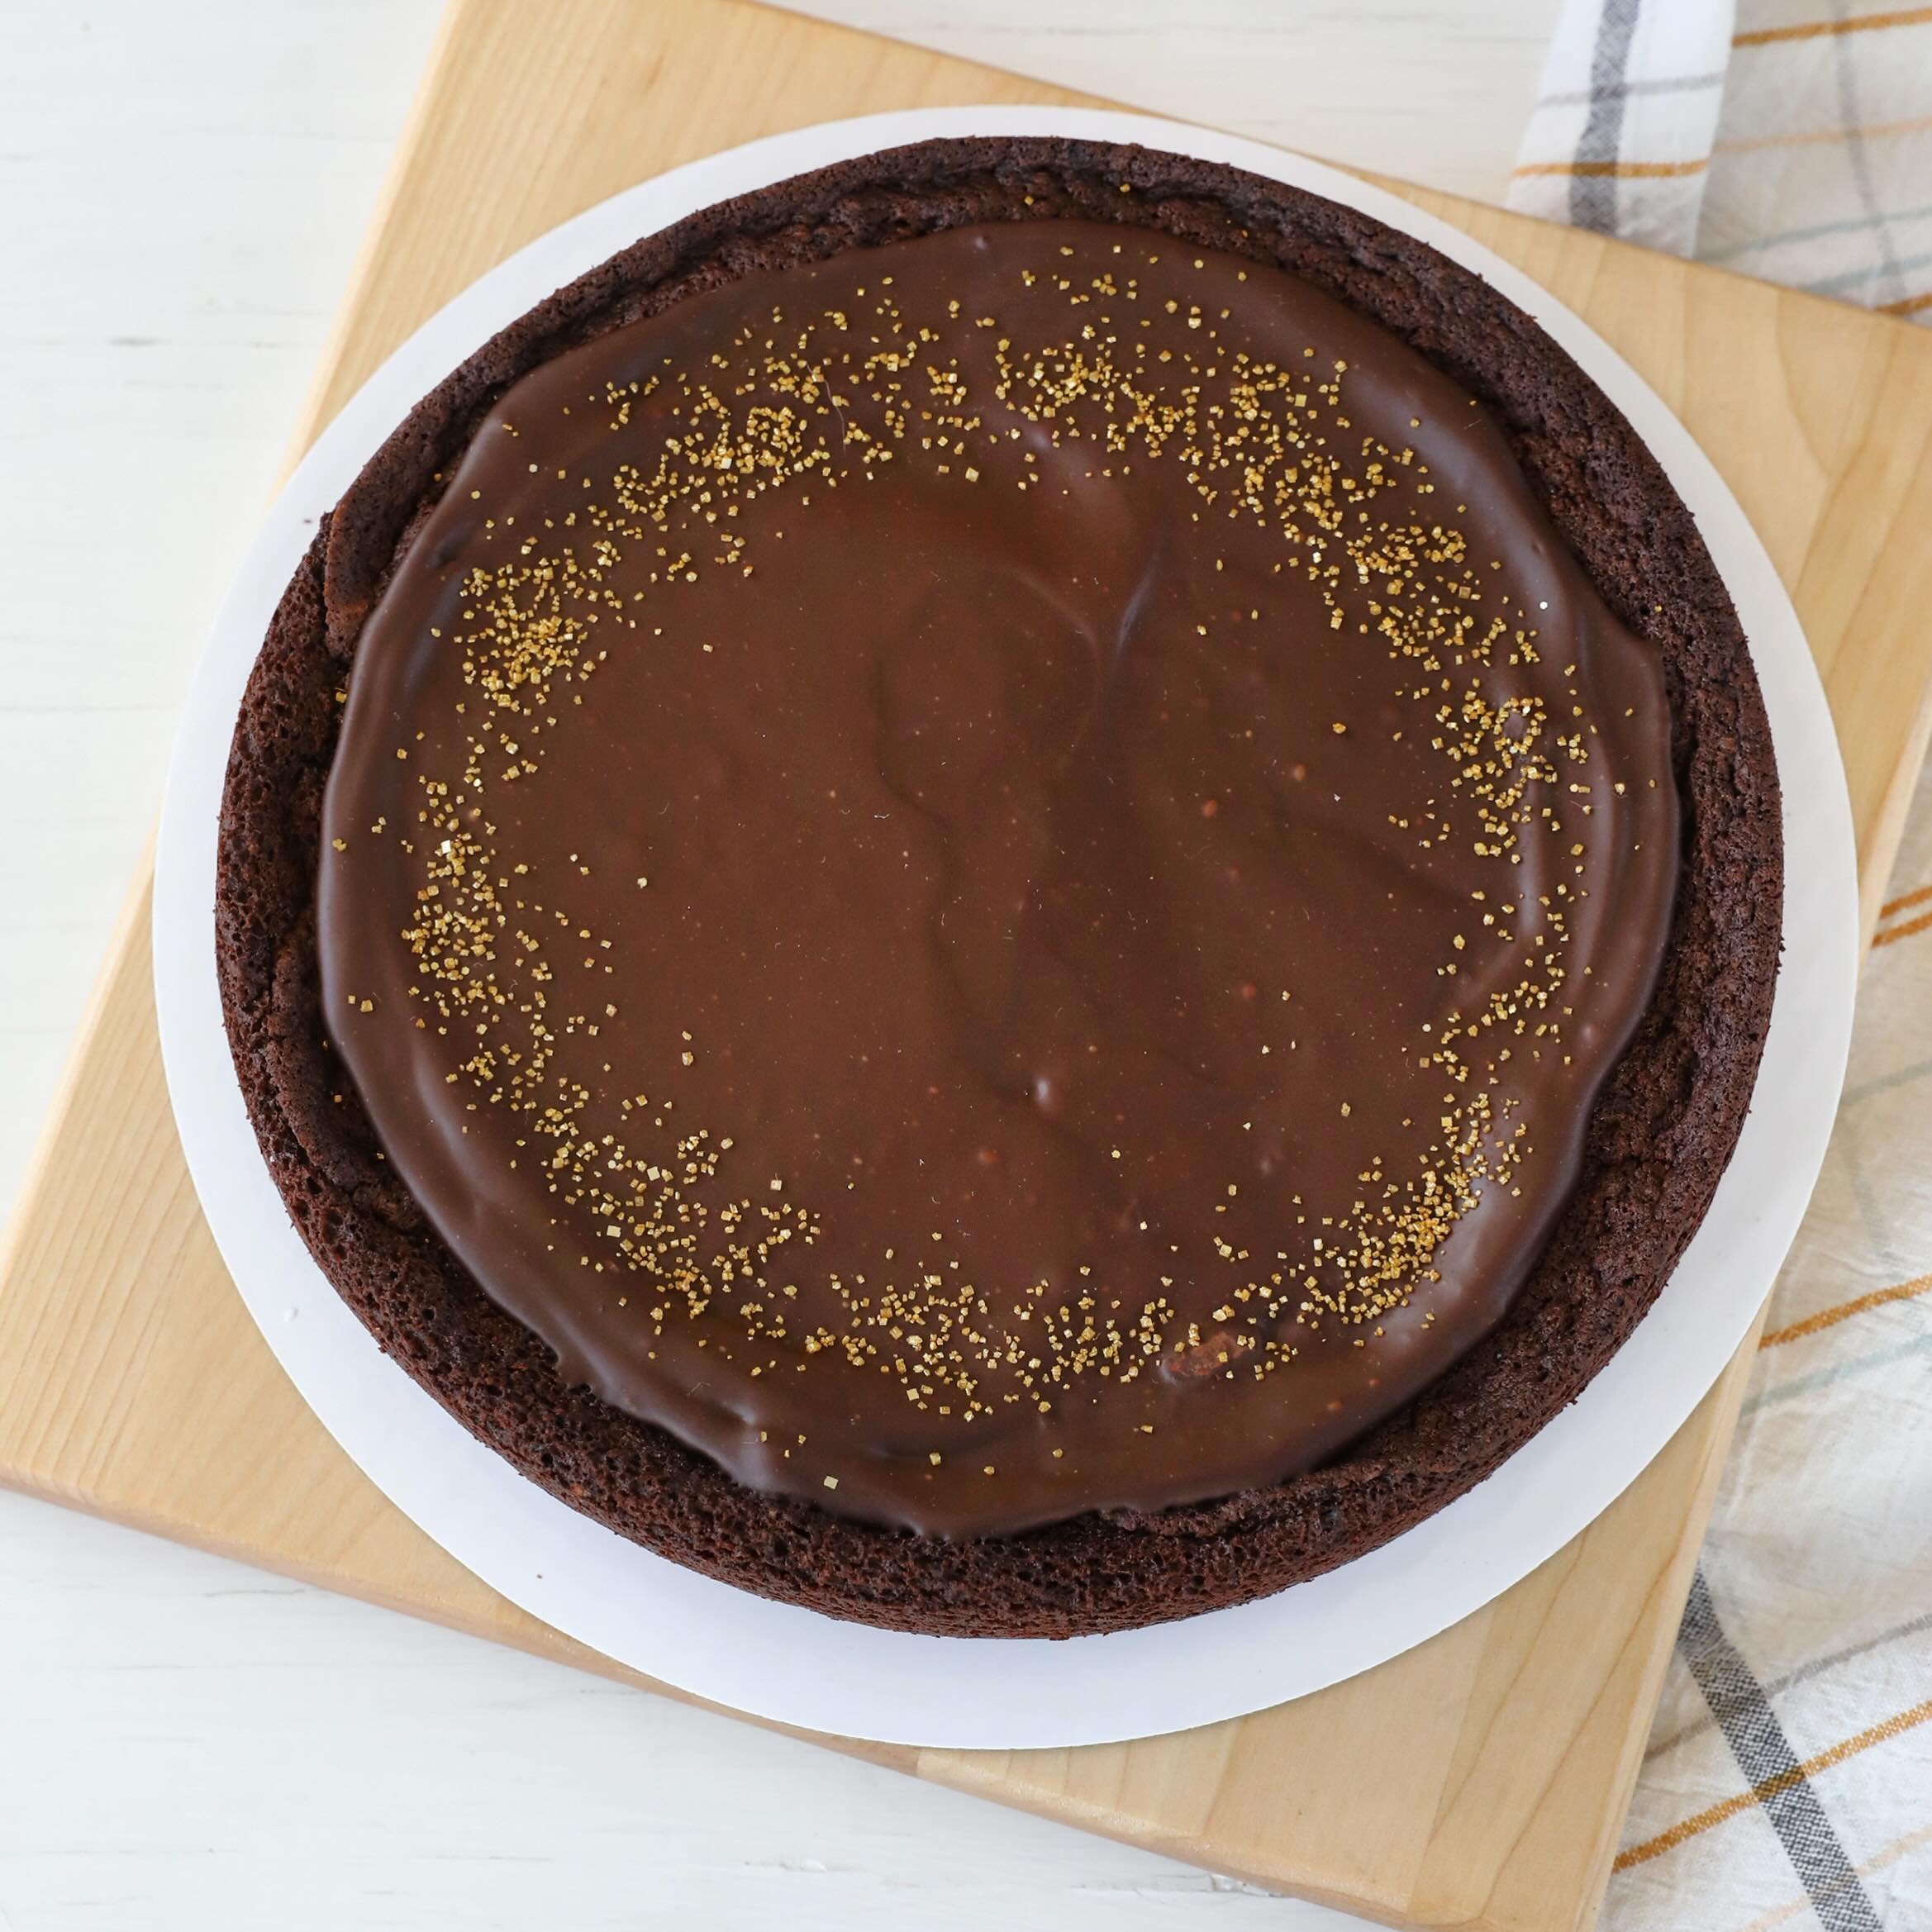 Vegan Chocolate Torte 🤎

Available by special order, and also on our Mother&rsquo;s Day menu! Ordering links in bio. 

#chocolate #torte #dessert #gfdessert #glutenfree #vegan #minneapolis #twincitiesfoodie #onlyinmn #glutenfreebakery #siftglutenfre